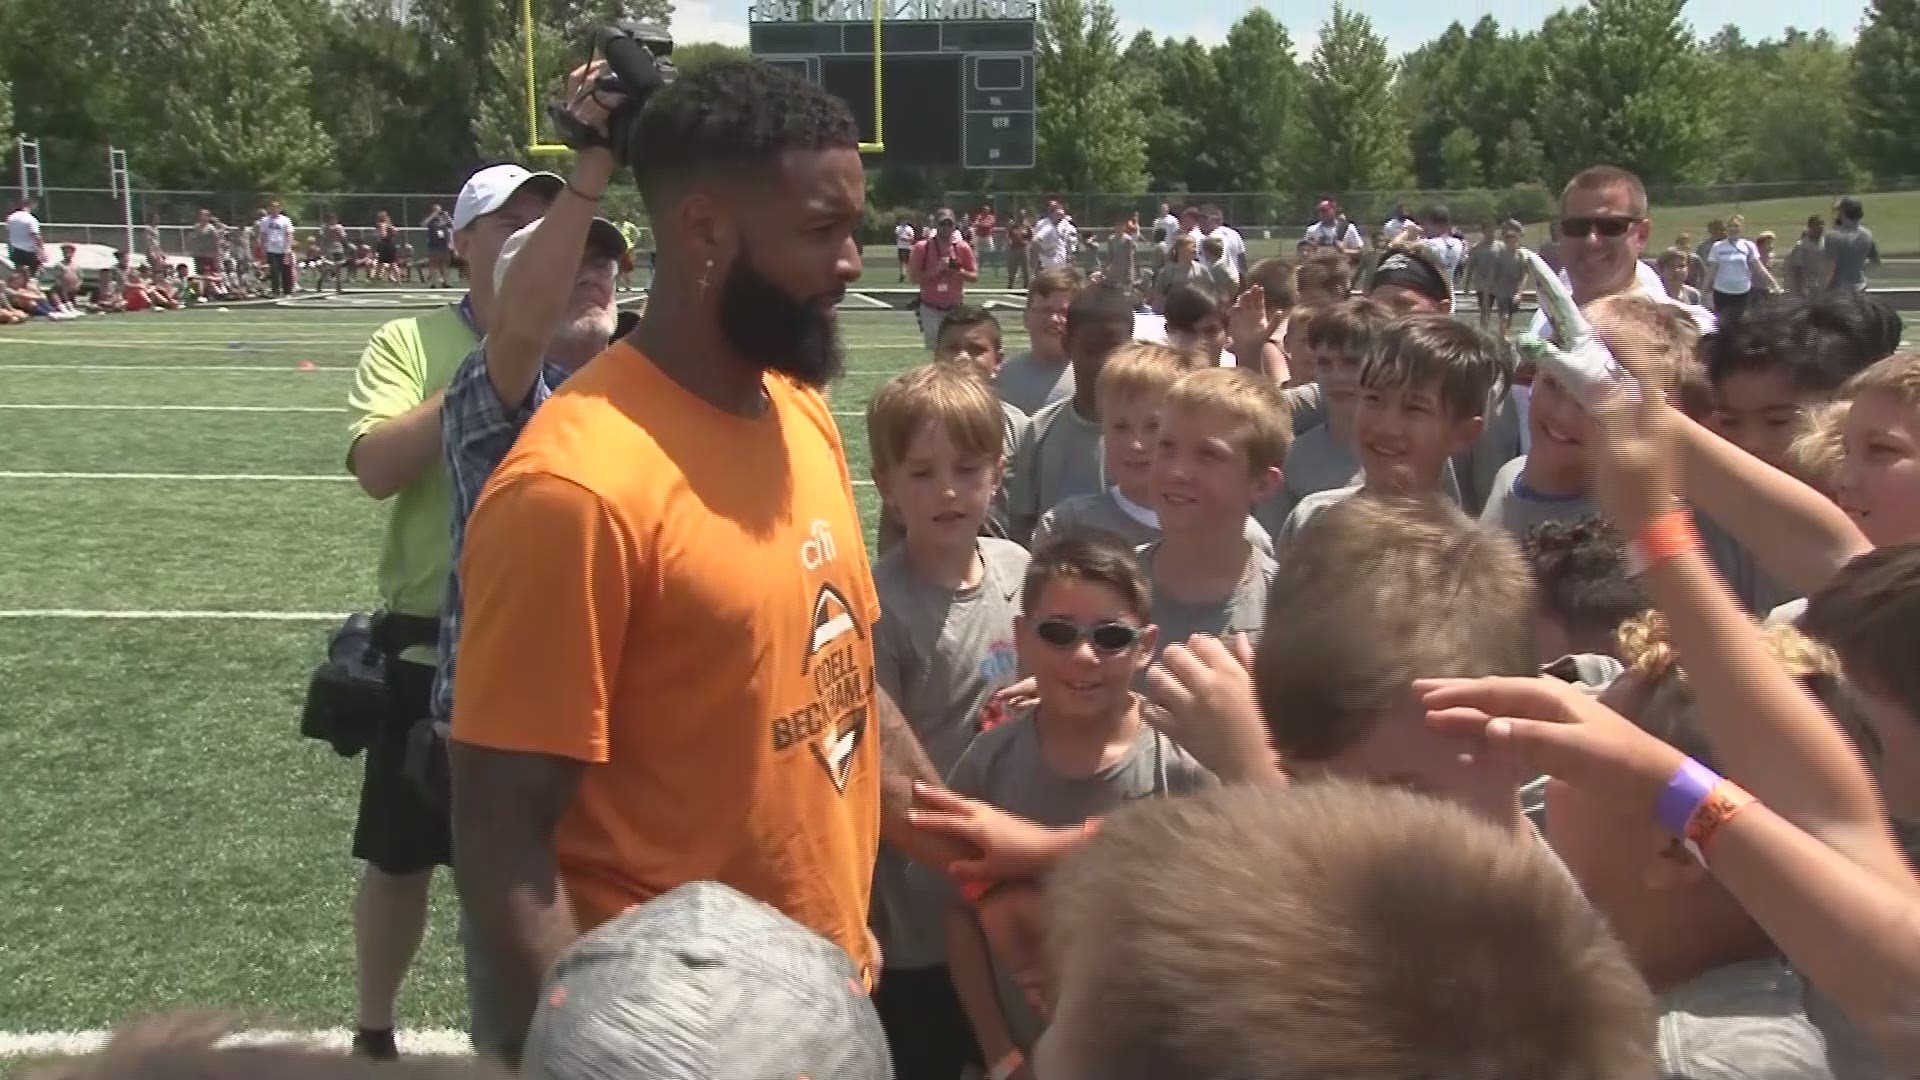 Cleveland Browns wide receiver Odell Beckham Jr. feels he relates well to the younger generation of football fans.